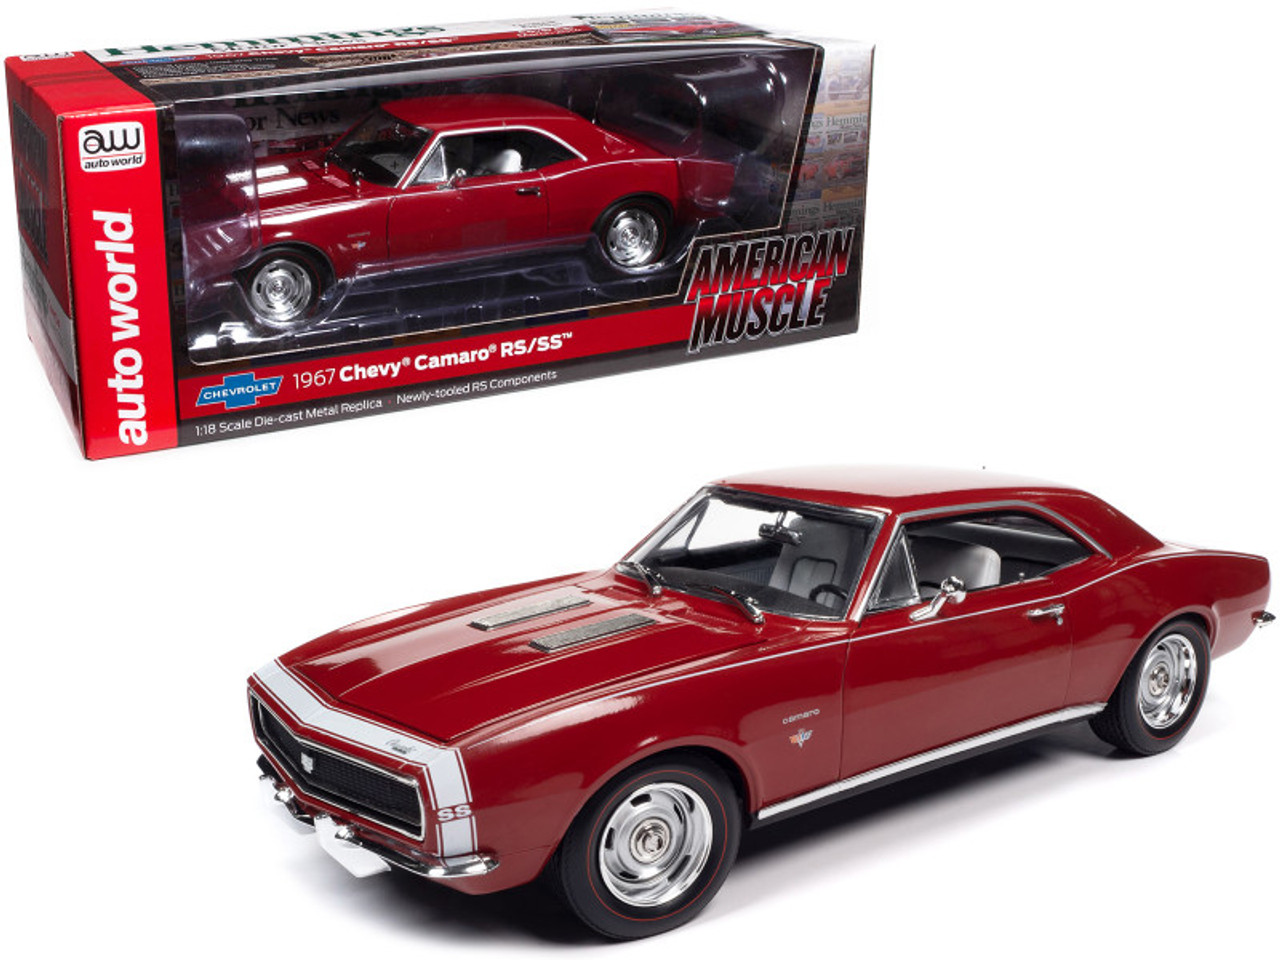 1/18 Auto World 1967 Chevrolet Camaro RS/SS Bolero (Red with White Stripe and White Interior) "Hemmings Motor News" Magazine Cover Car (March 2014) Diecast Car Model